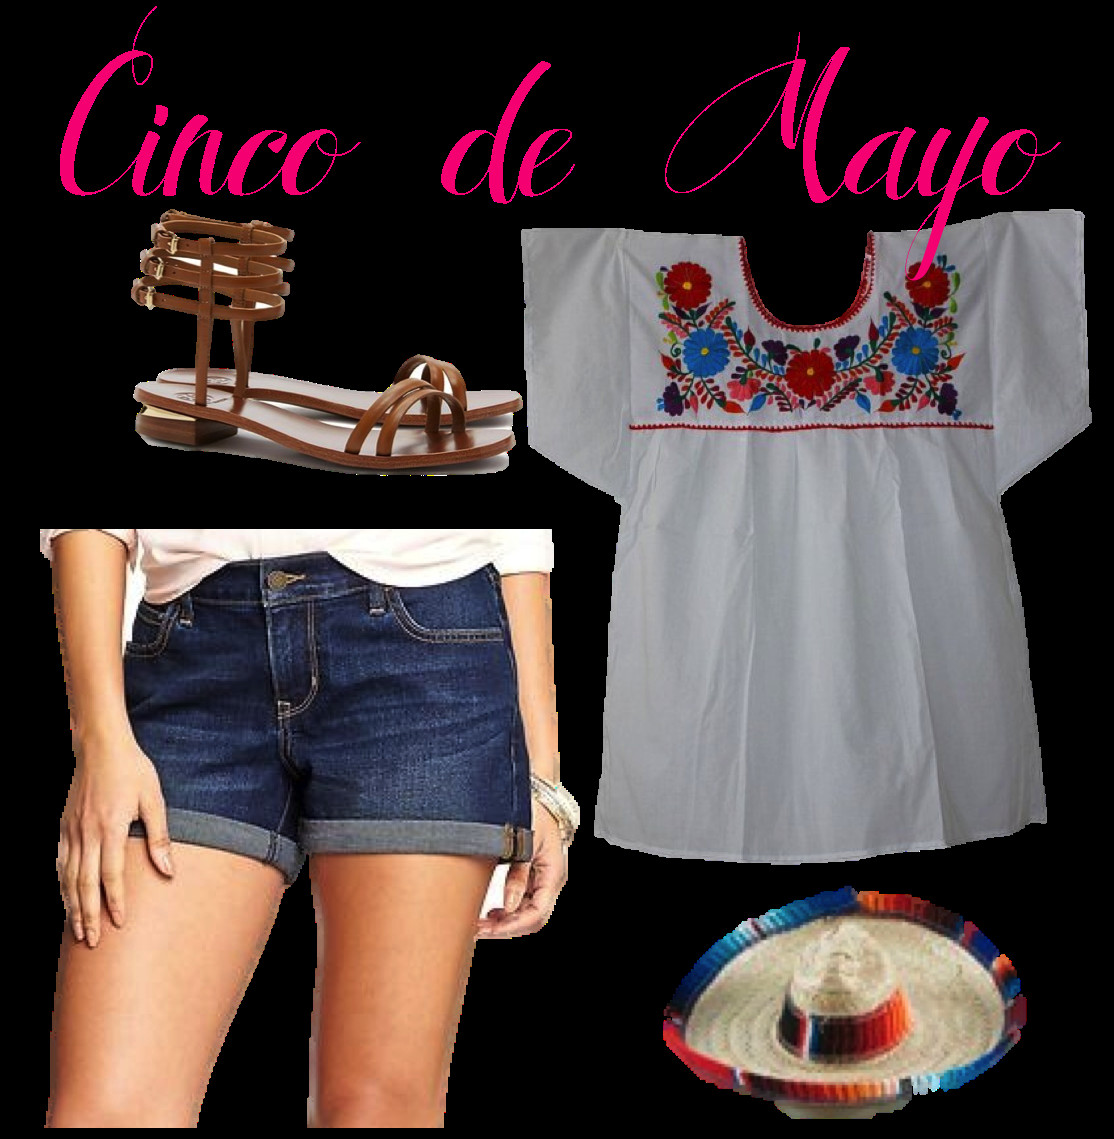 Cinco De Mayo Party Outfits
 Prep In Your Step Cinco de Mayo Outfit Inspiration